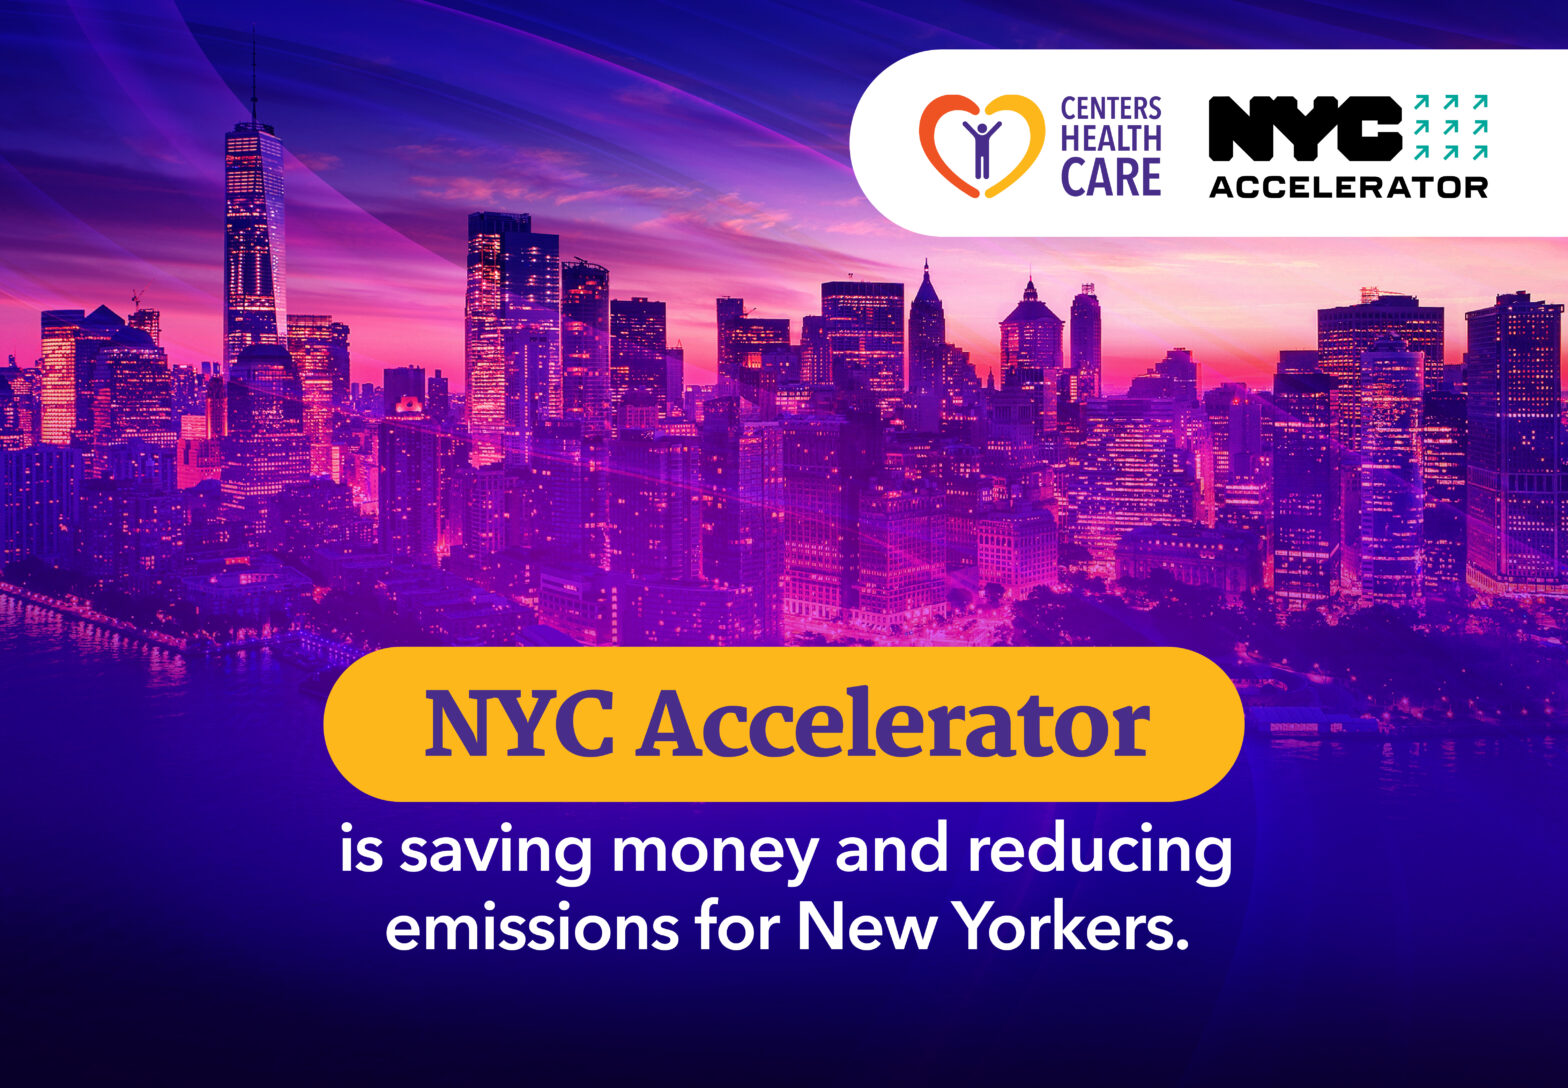 NYC Accelerator is saving money and reducing emissions for New Yorkers